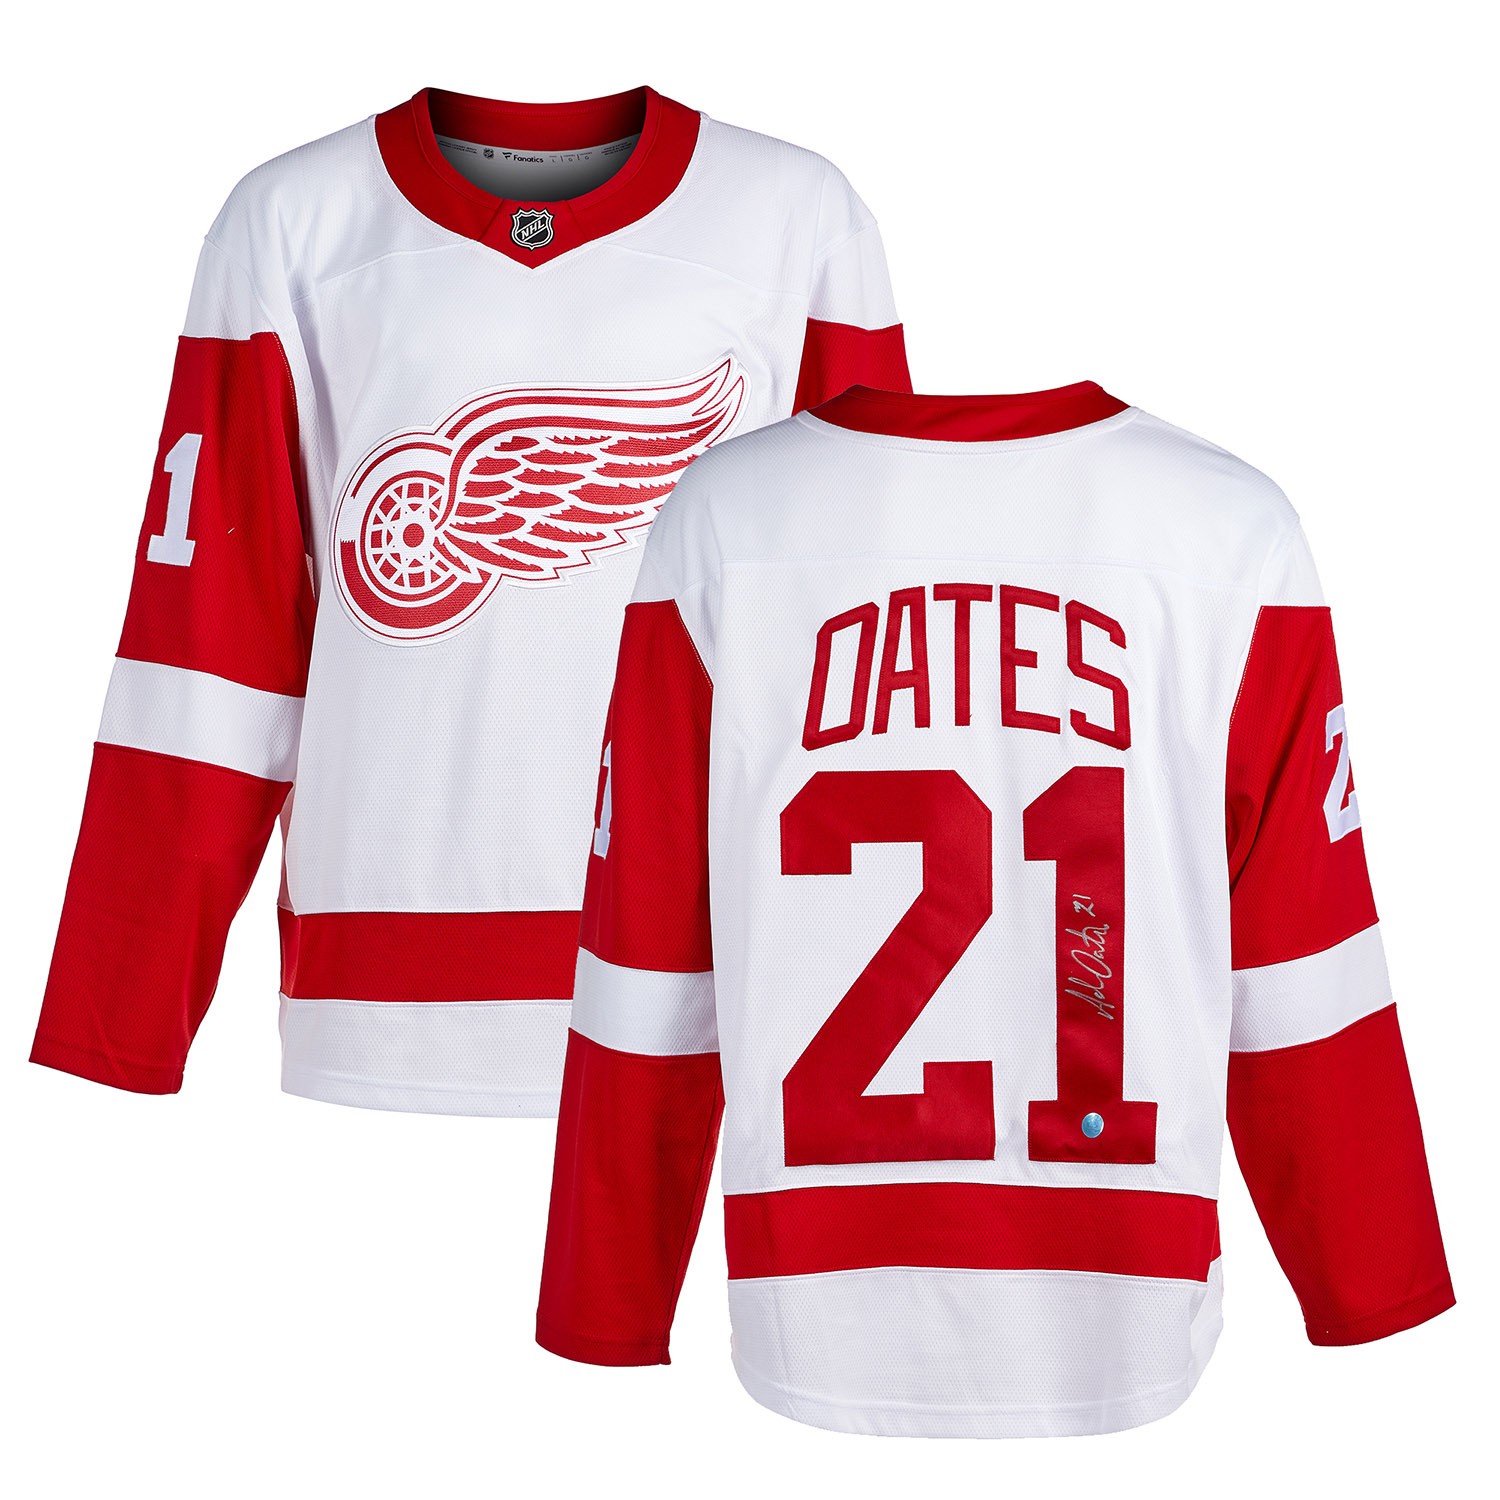 Detroit Red Wings Collectibles, Red Wings Memorabilia, Detroit Red Wings  Autographed Memorabilia